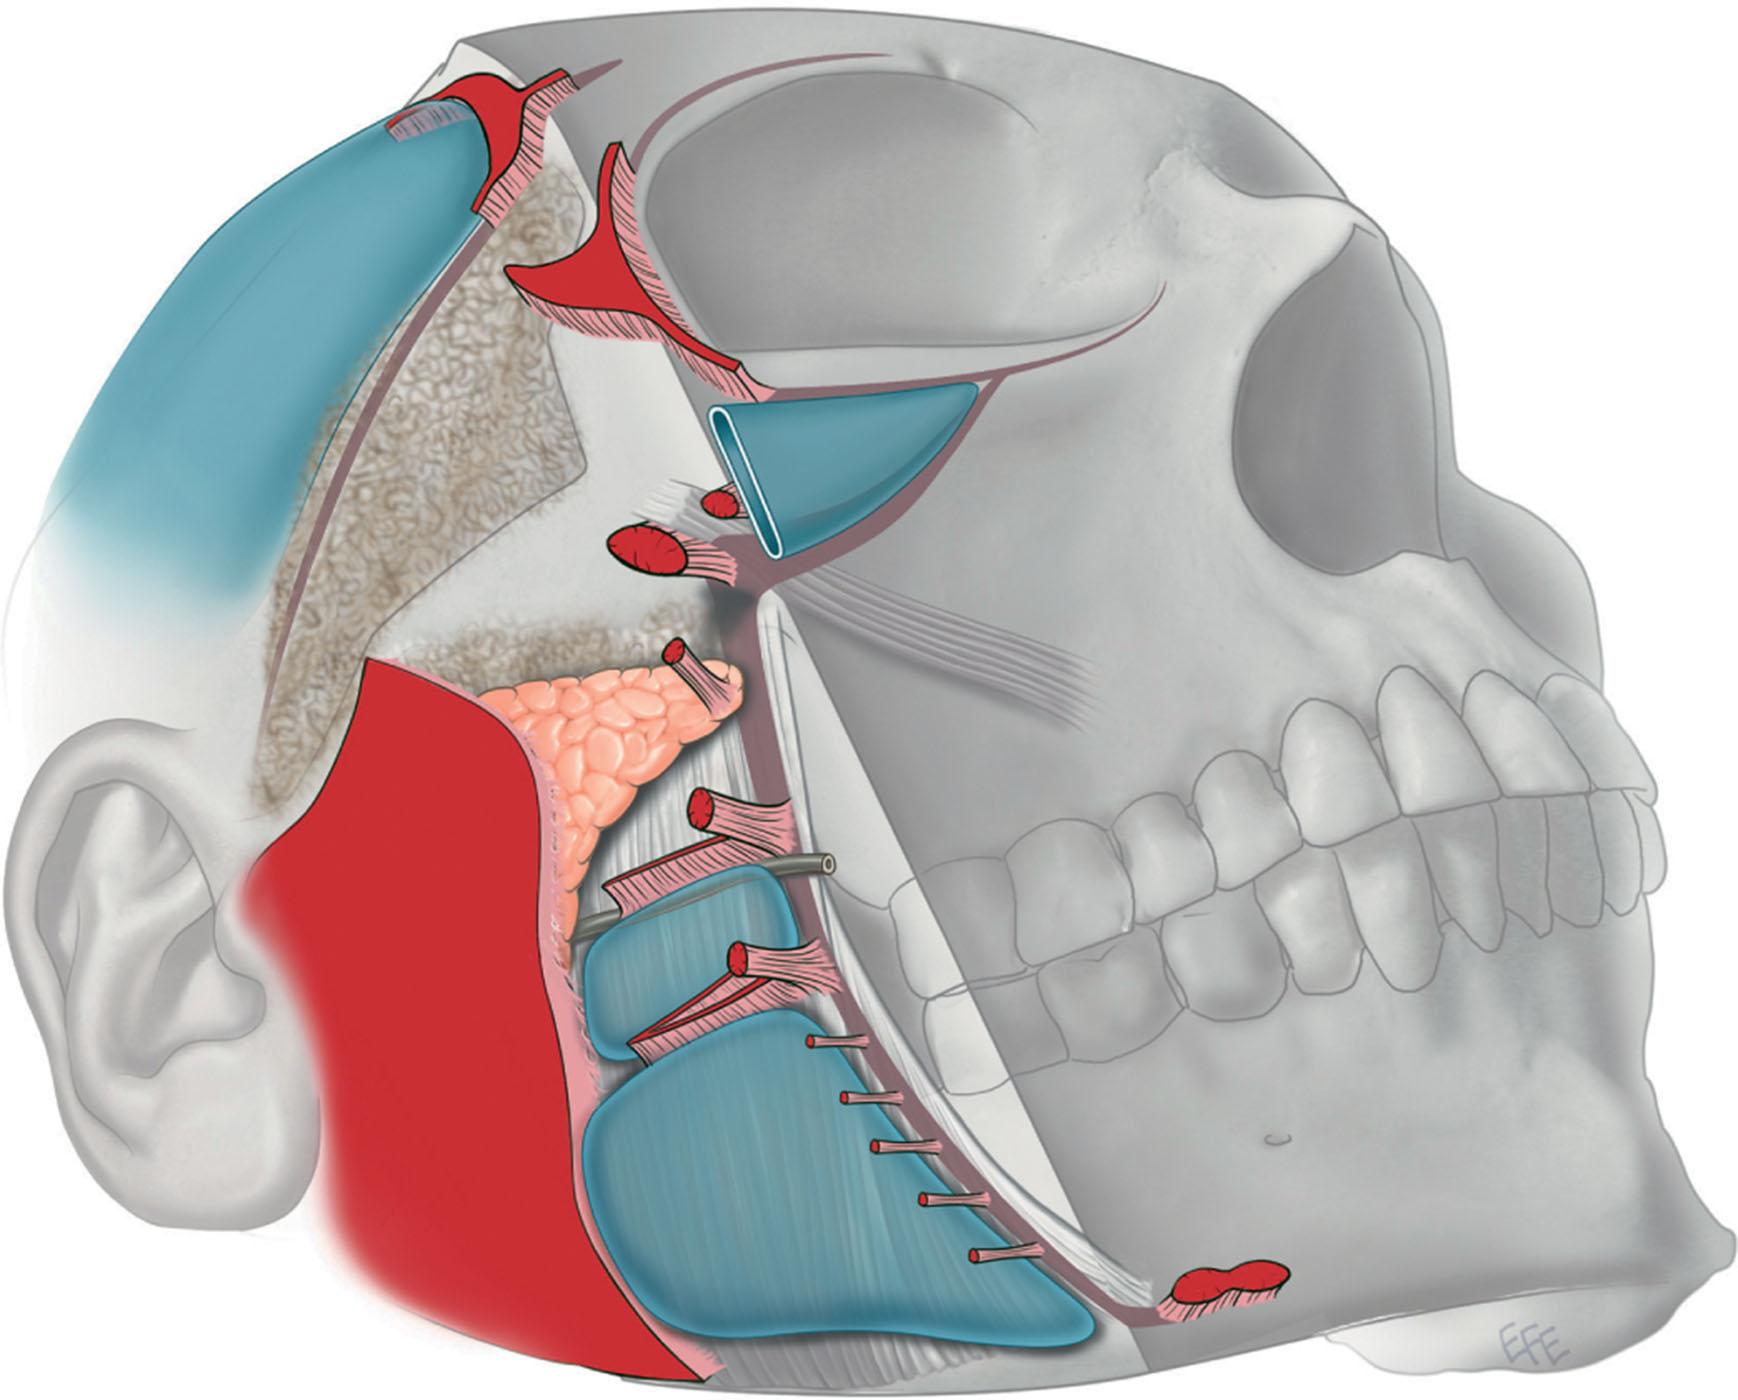 Figure 9.3.9, Mendelson's interpretation of soft-tissue attachments (see Chapter 9.2 ). The fixed posterior soft tissue is held in place by the platysma auricular fascia (large red area). The anterior face is fixed by a vertical column of attachments: orbital ligament, lateral orbital thickening (superficial canthal tendon), zygomatic ligaments, masseteric ligaments, mandibular ligament). In the midcheek, there is some mobility of these ligaments, while there is limited mobility over the platysma auricular fascia. The so-called “fixed SMAS” is that portion attached to the parotid and the posterior border of the platysma. Anterior to this, is the “mobile SMAS”. (Courtesy of Dr. Levent Efe, CMI.)